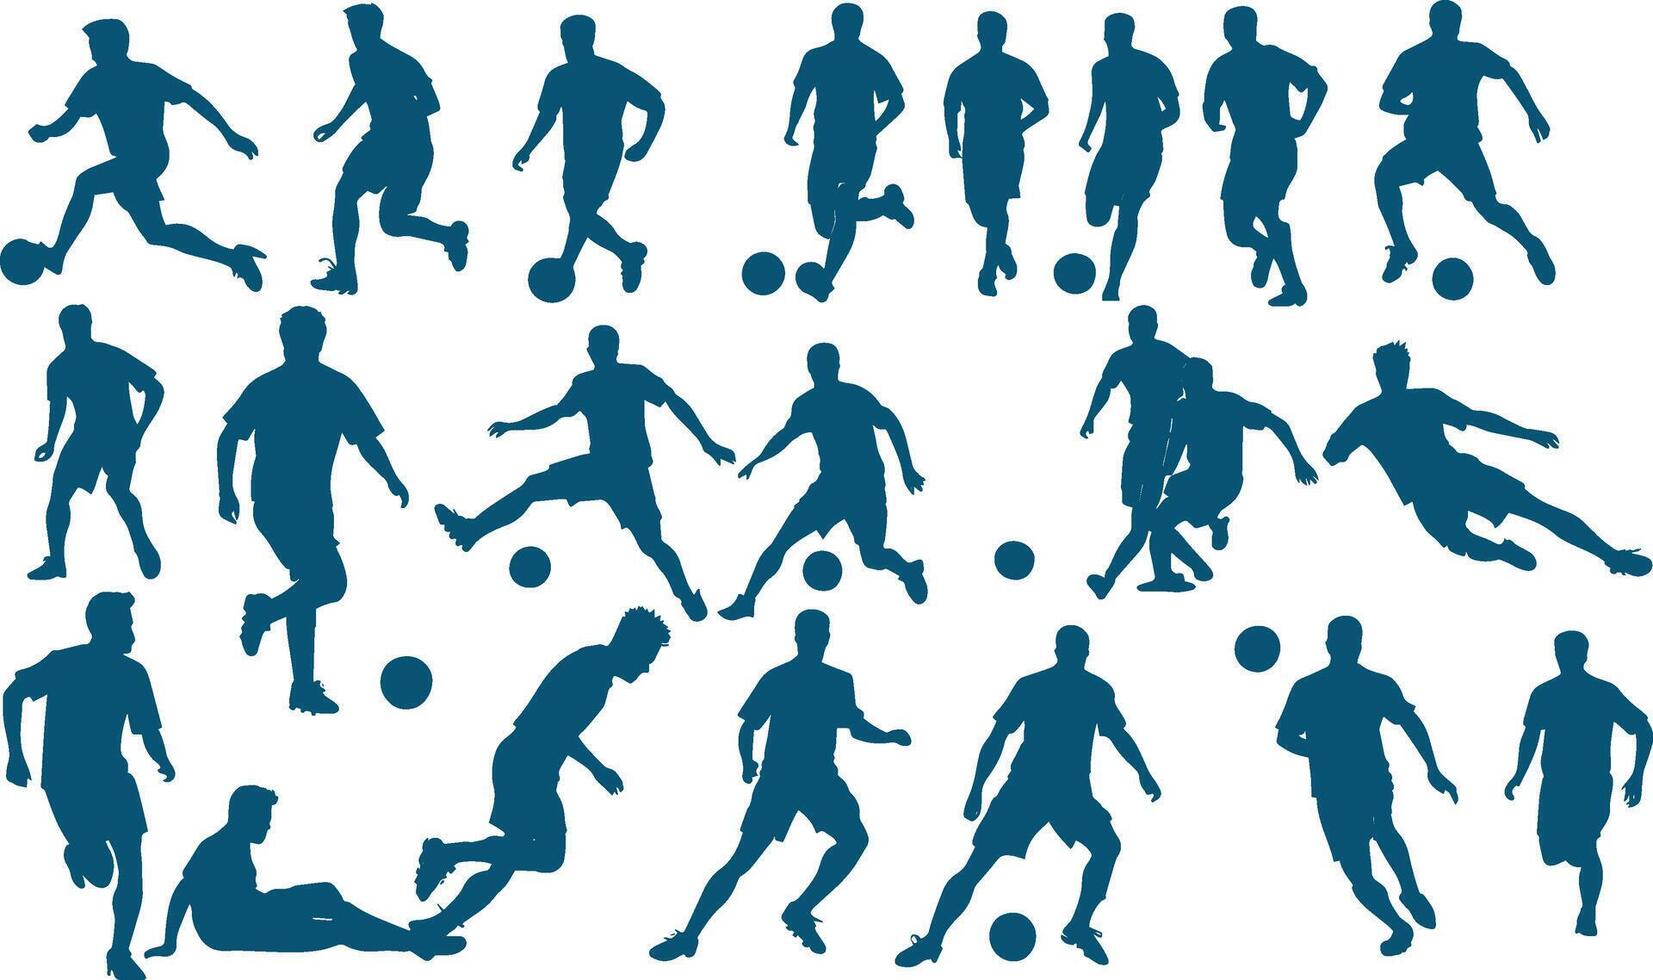 A set of Soccer players Silhouettes vector